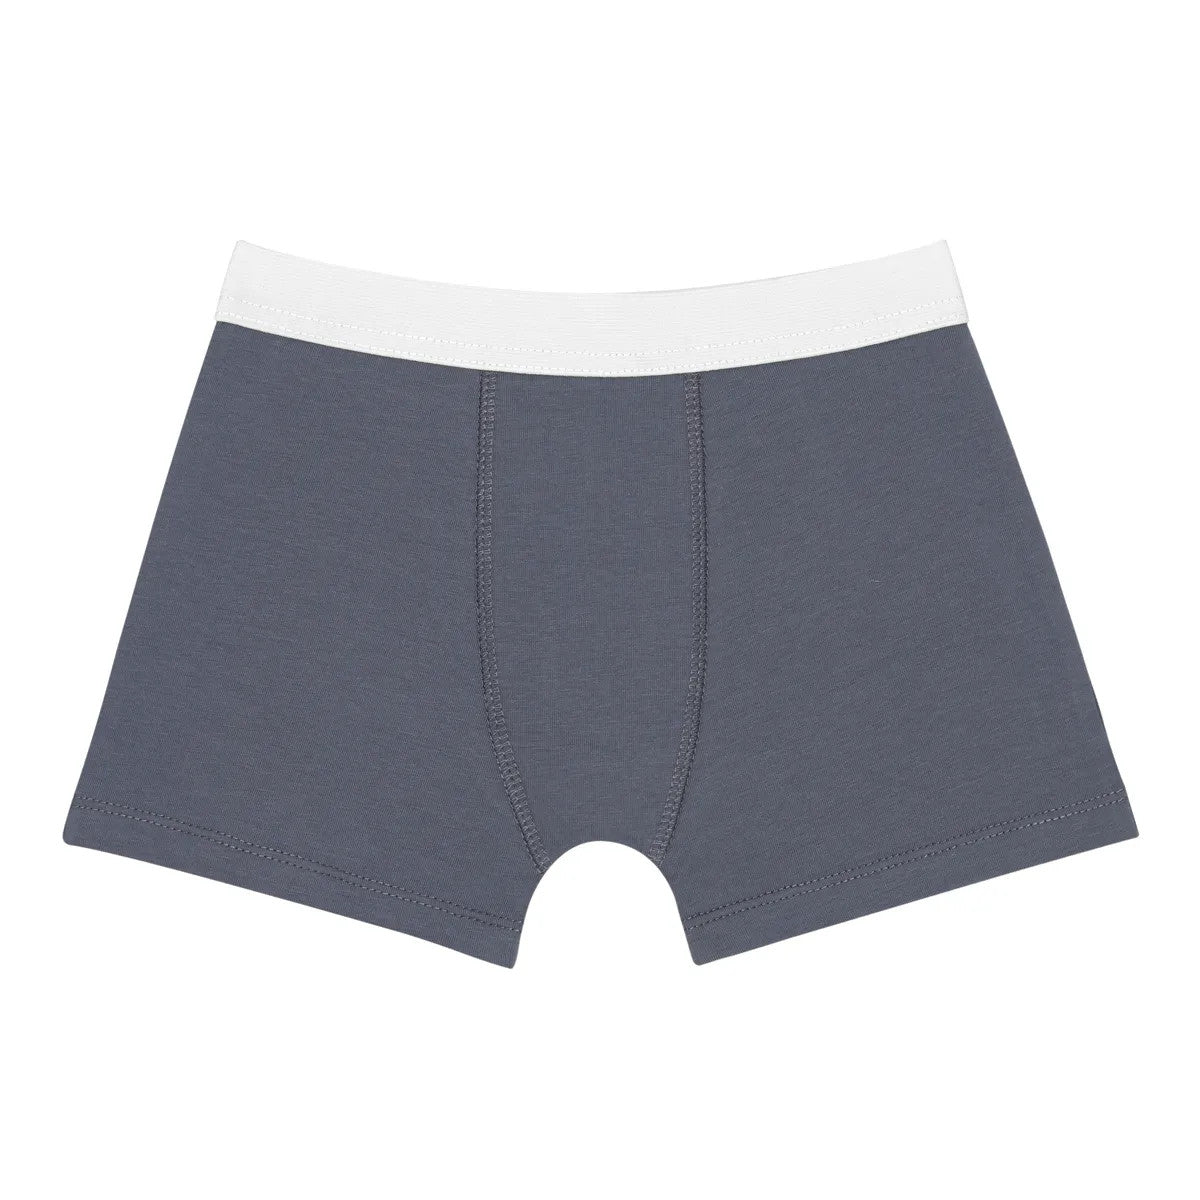 Just the perfect Little Hedonist boy undie. Soft, feels like second skin. Easy to move around in. Made from the best organic cotton there is. 2 pieces per pack.